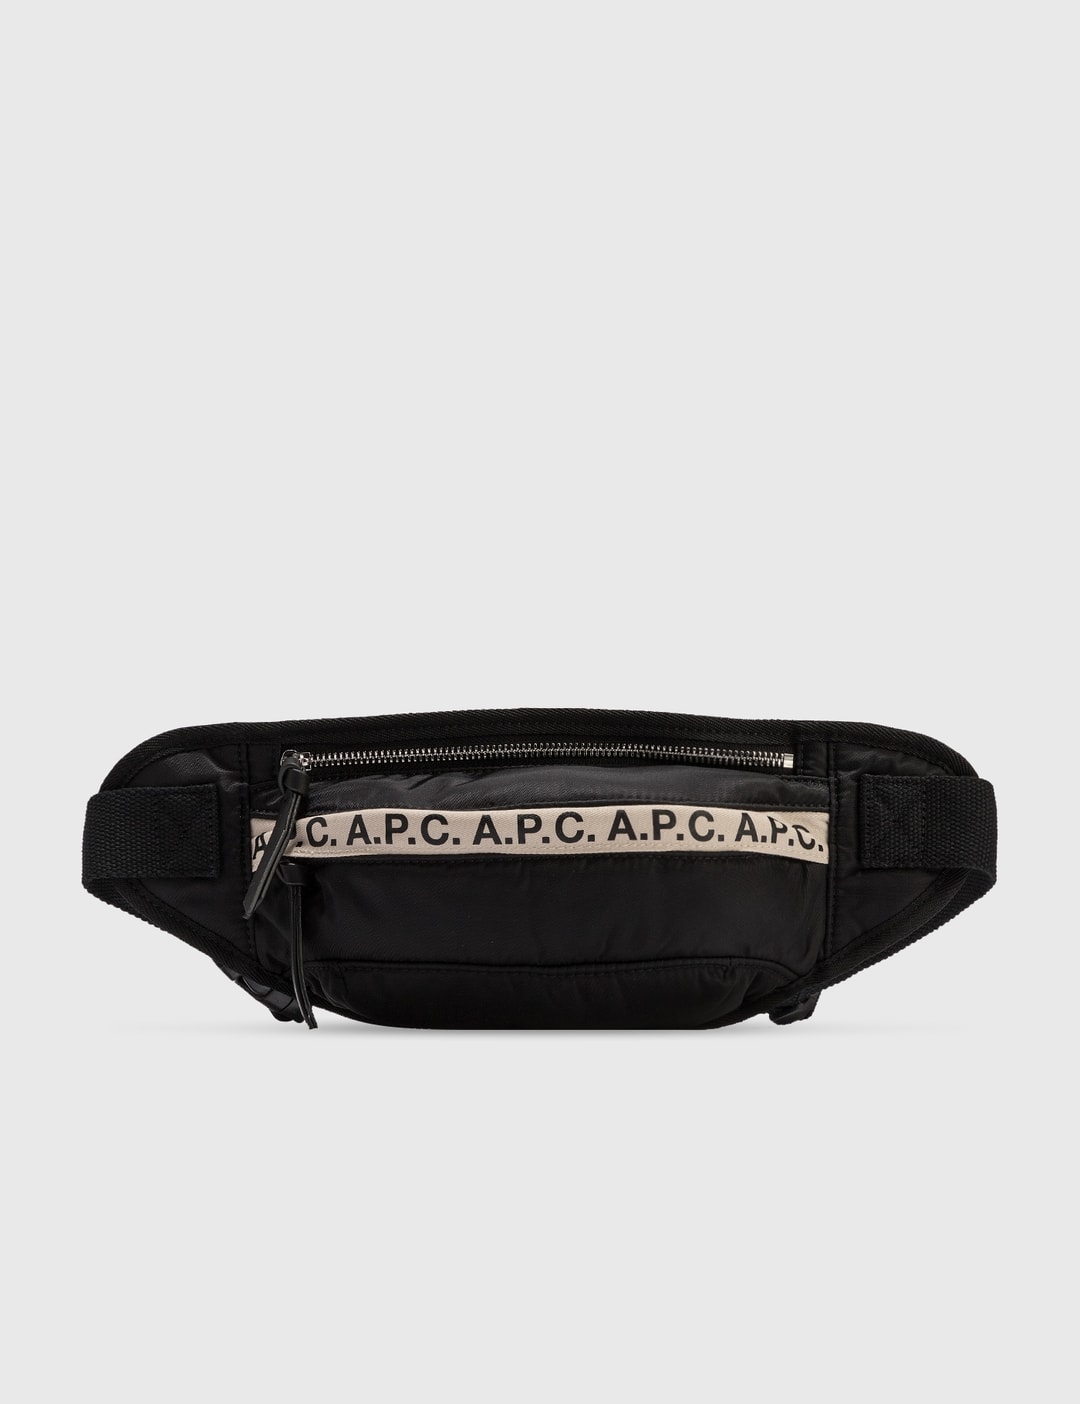 A.P.C. - Lucille Hip Bag | HBX - Globally Curated Fashion and Lifestyle ...